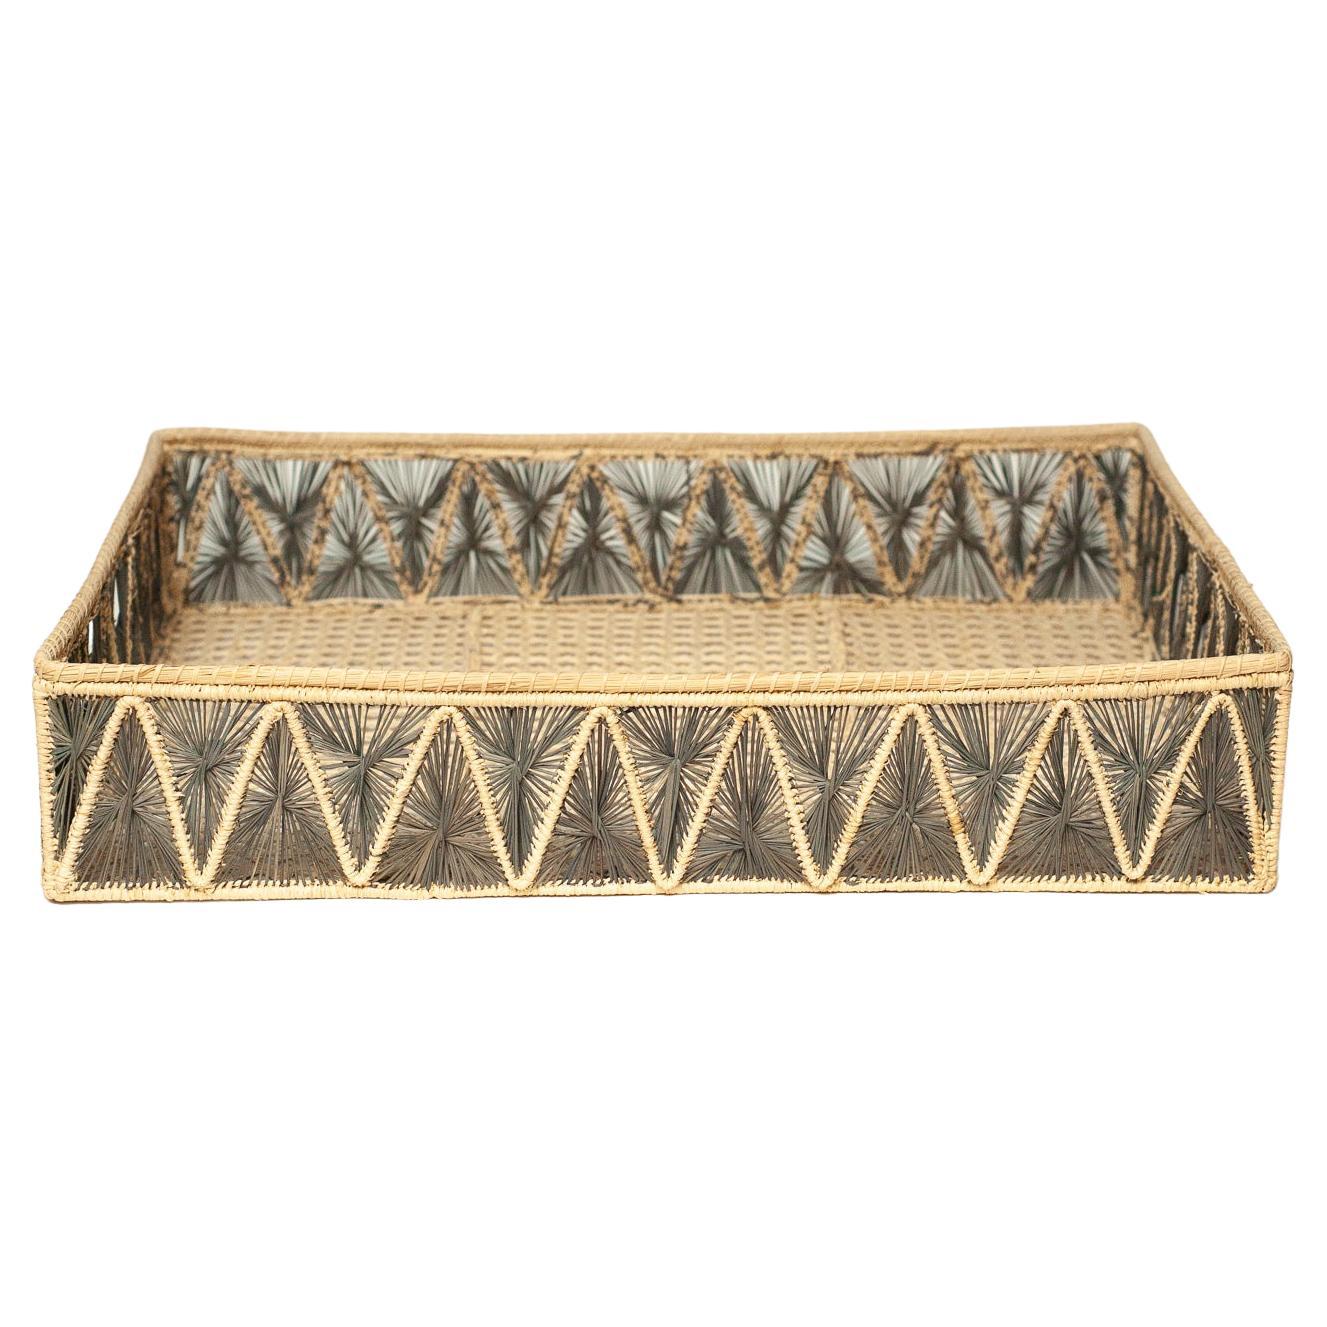 Contemporary Handwoven Natural and Grey Rattan Serving Tray / Basket